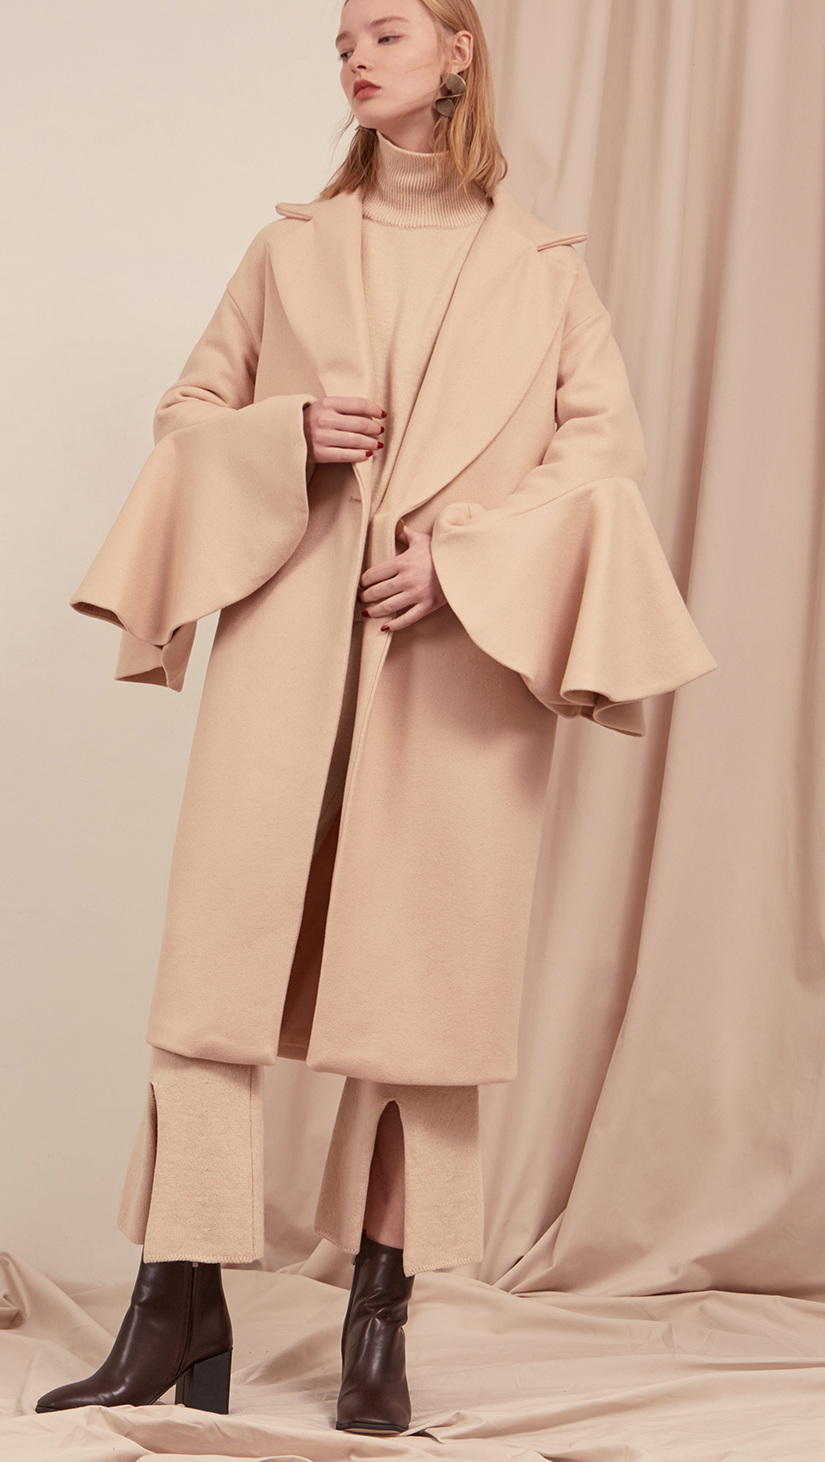 The Ruliette coat styled with gathered wide flare sleeves. With raw-edge ruffled puff sleeves, oversized felt-faced point collar, convertible notch lapel, back drop shoulders, one button closure at front, on-seam vertical slip pockets. Fully lined. Mid-weight.